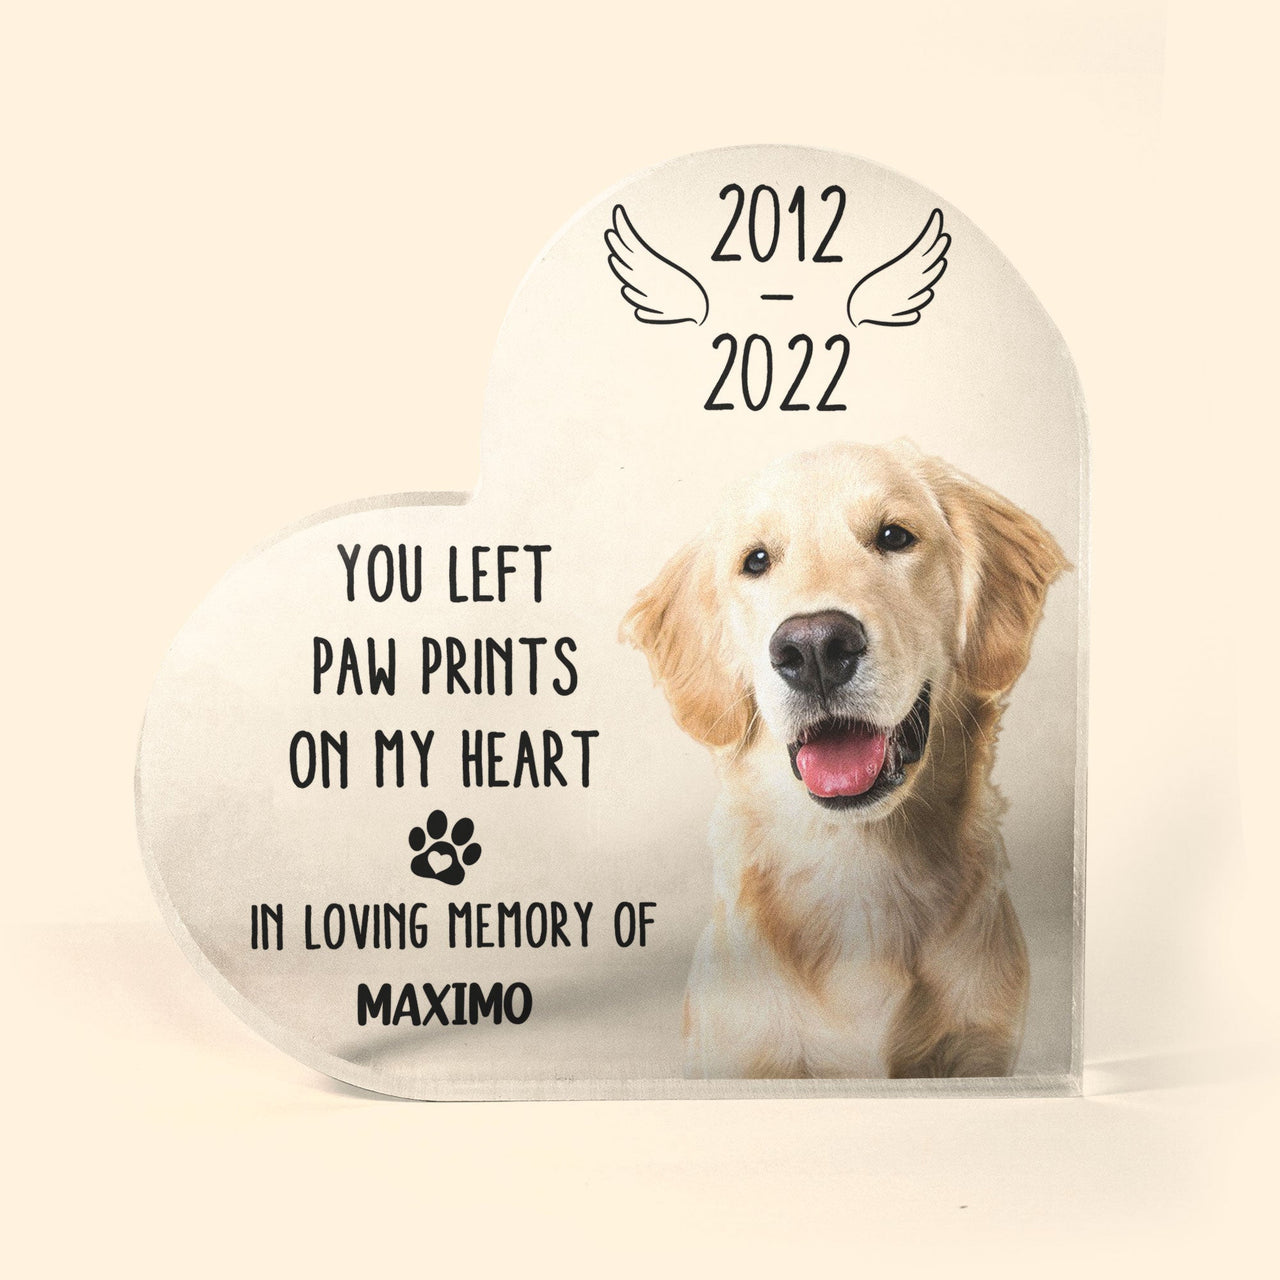 You Left Paw Prints On My Heart - Personalized Memorial Heart Acrylic Plaque, Loving Gift For Pet Loss Owners